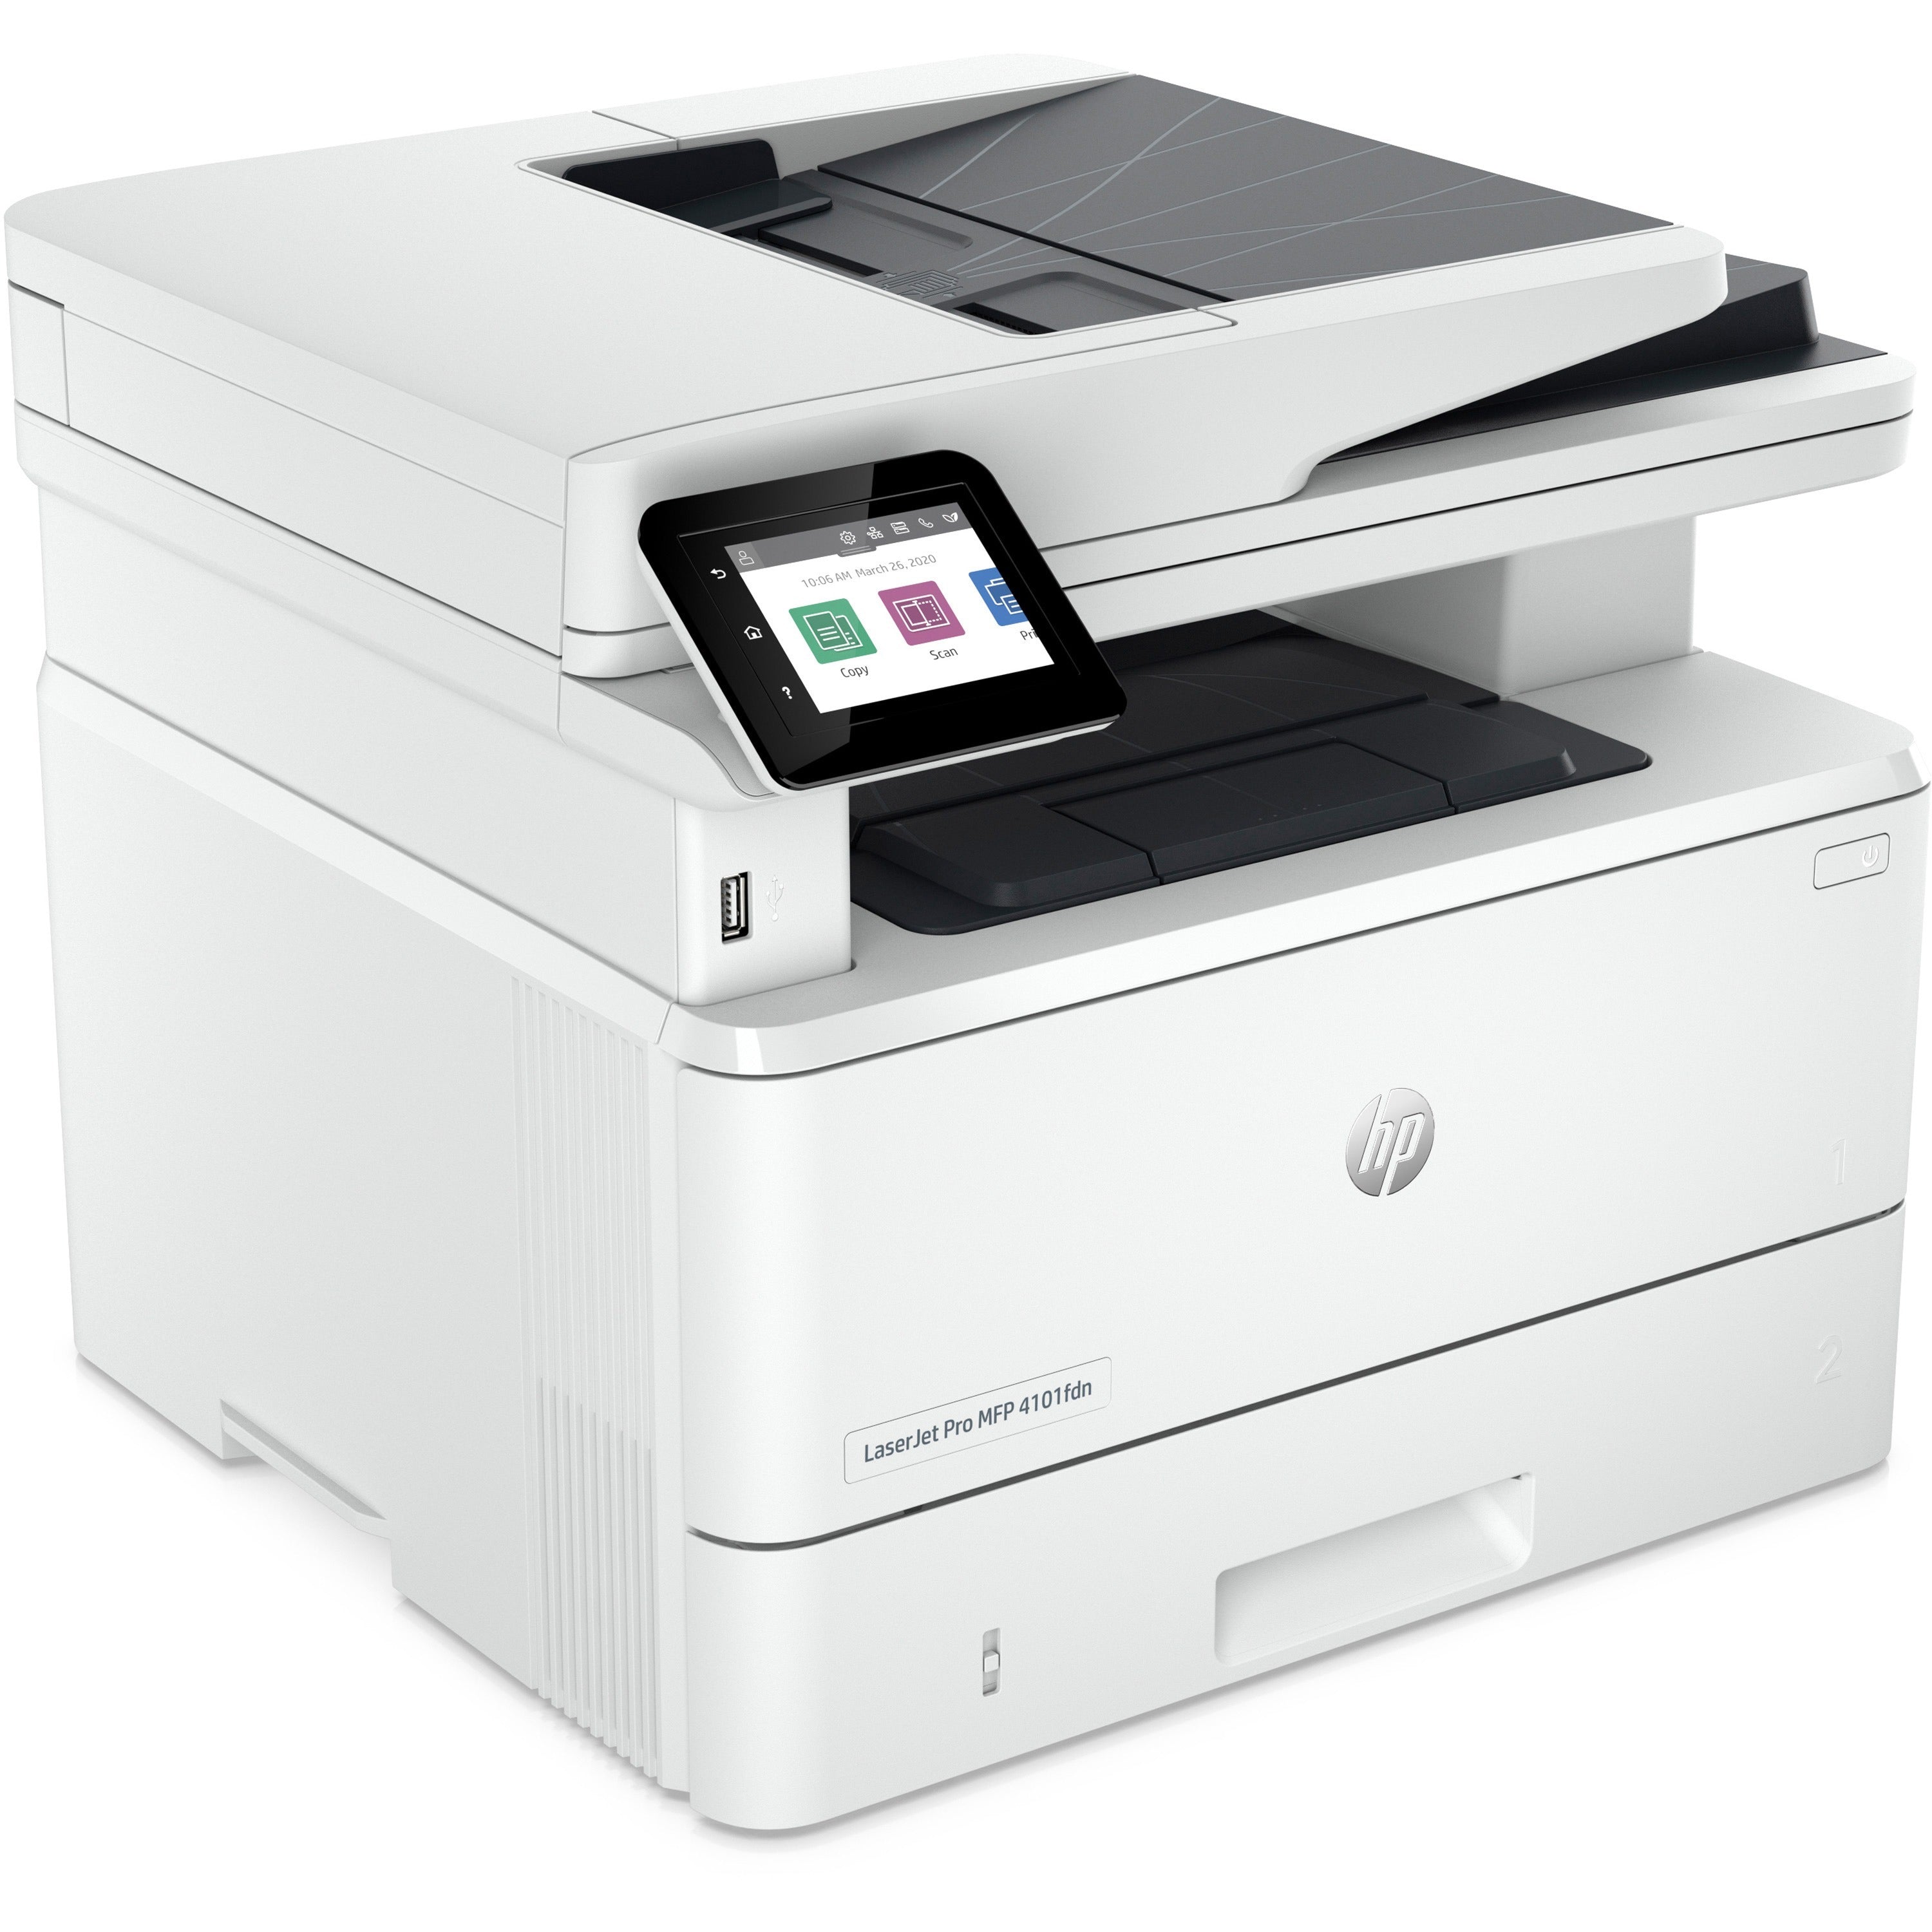 hp-laserjet-pro-4101fdw-wireless-laser-multifunction-printer-monochrome-white-copier-fax-printer-scanner-4800-x-600-dpi-print-automatic-duplex-print-up-to-80000-pages-monthly-color-flatbed-scanner-1200-dpi-optical-scan-monochrome-fa_hew2z619f - 3